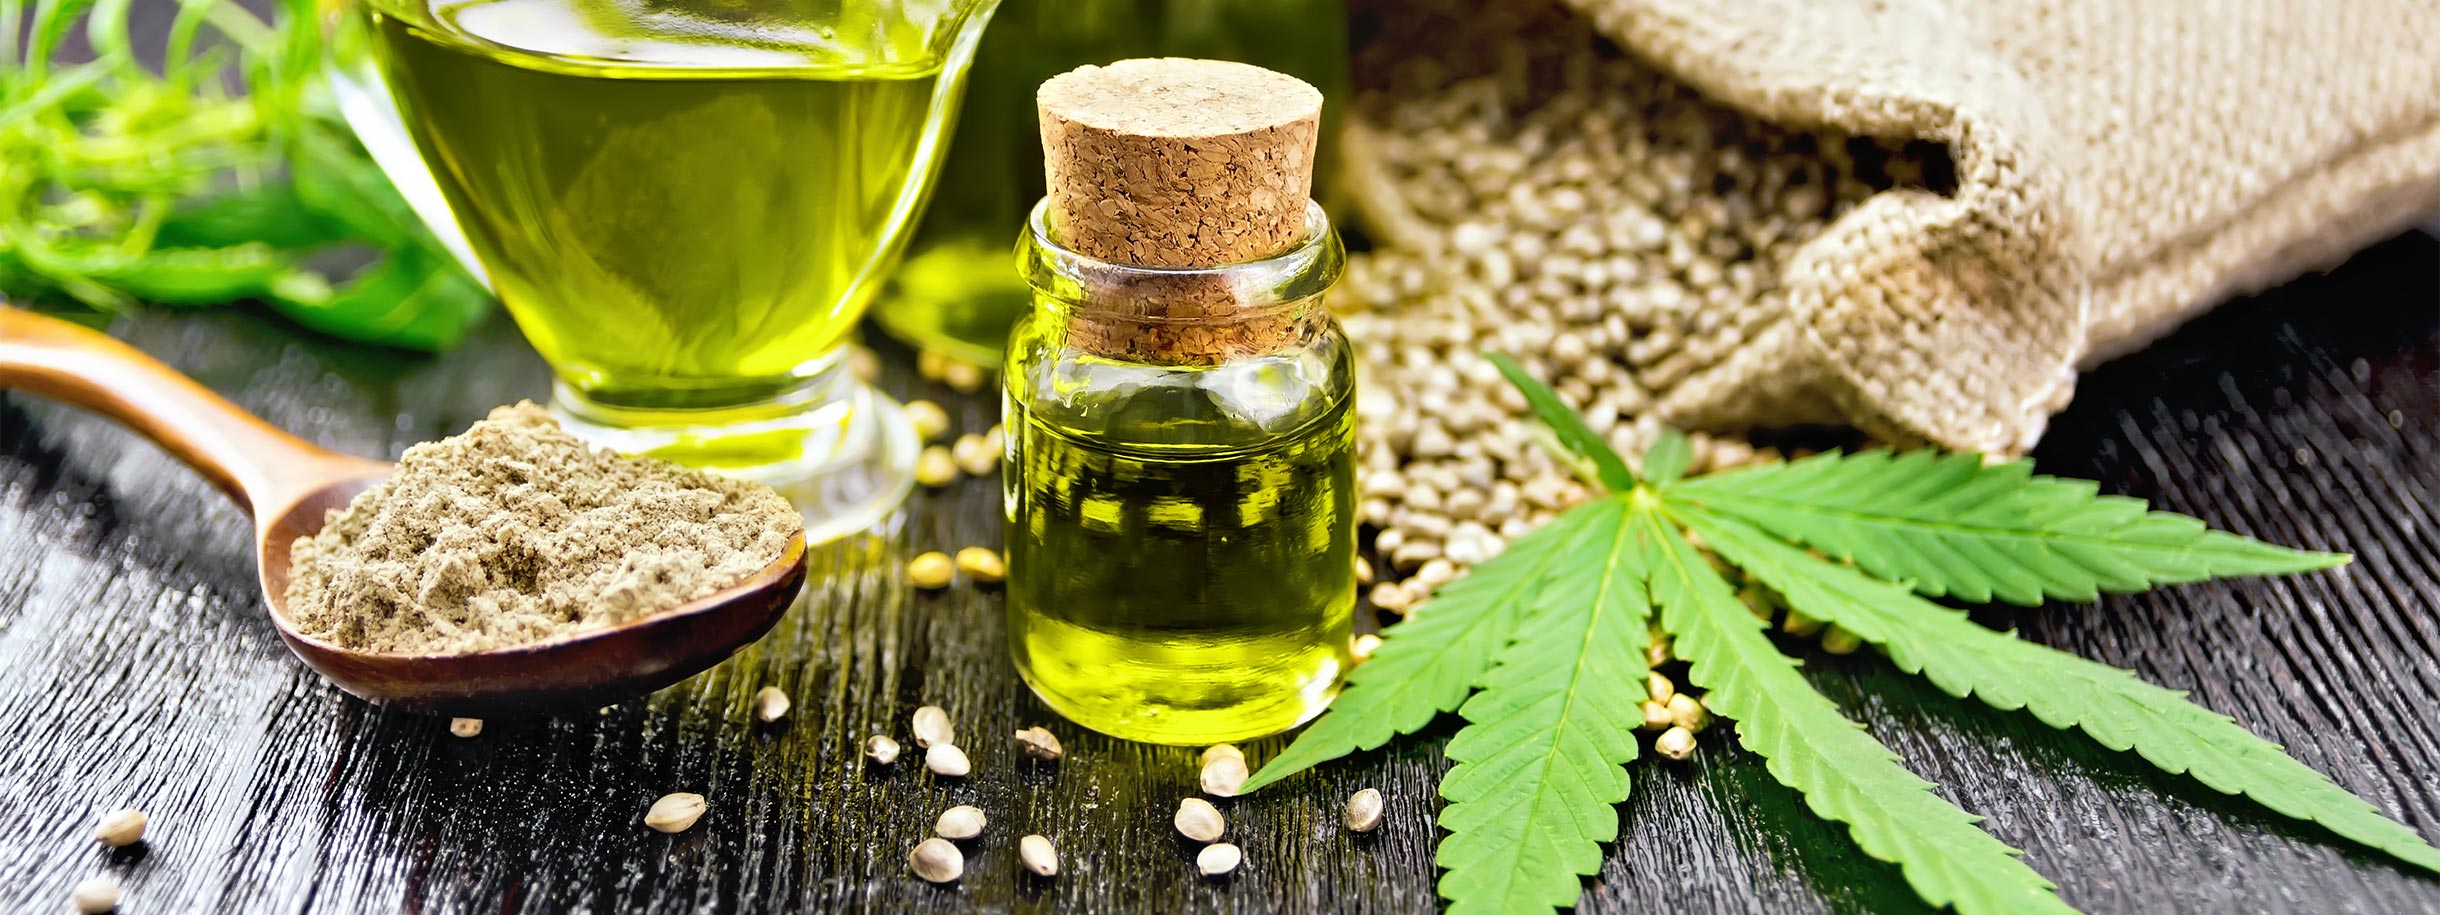 image of Hemp seeds, powder, oil and plant